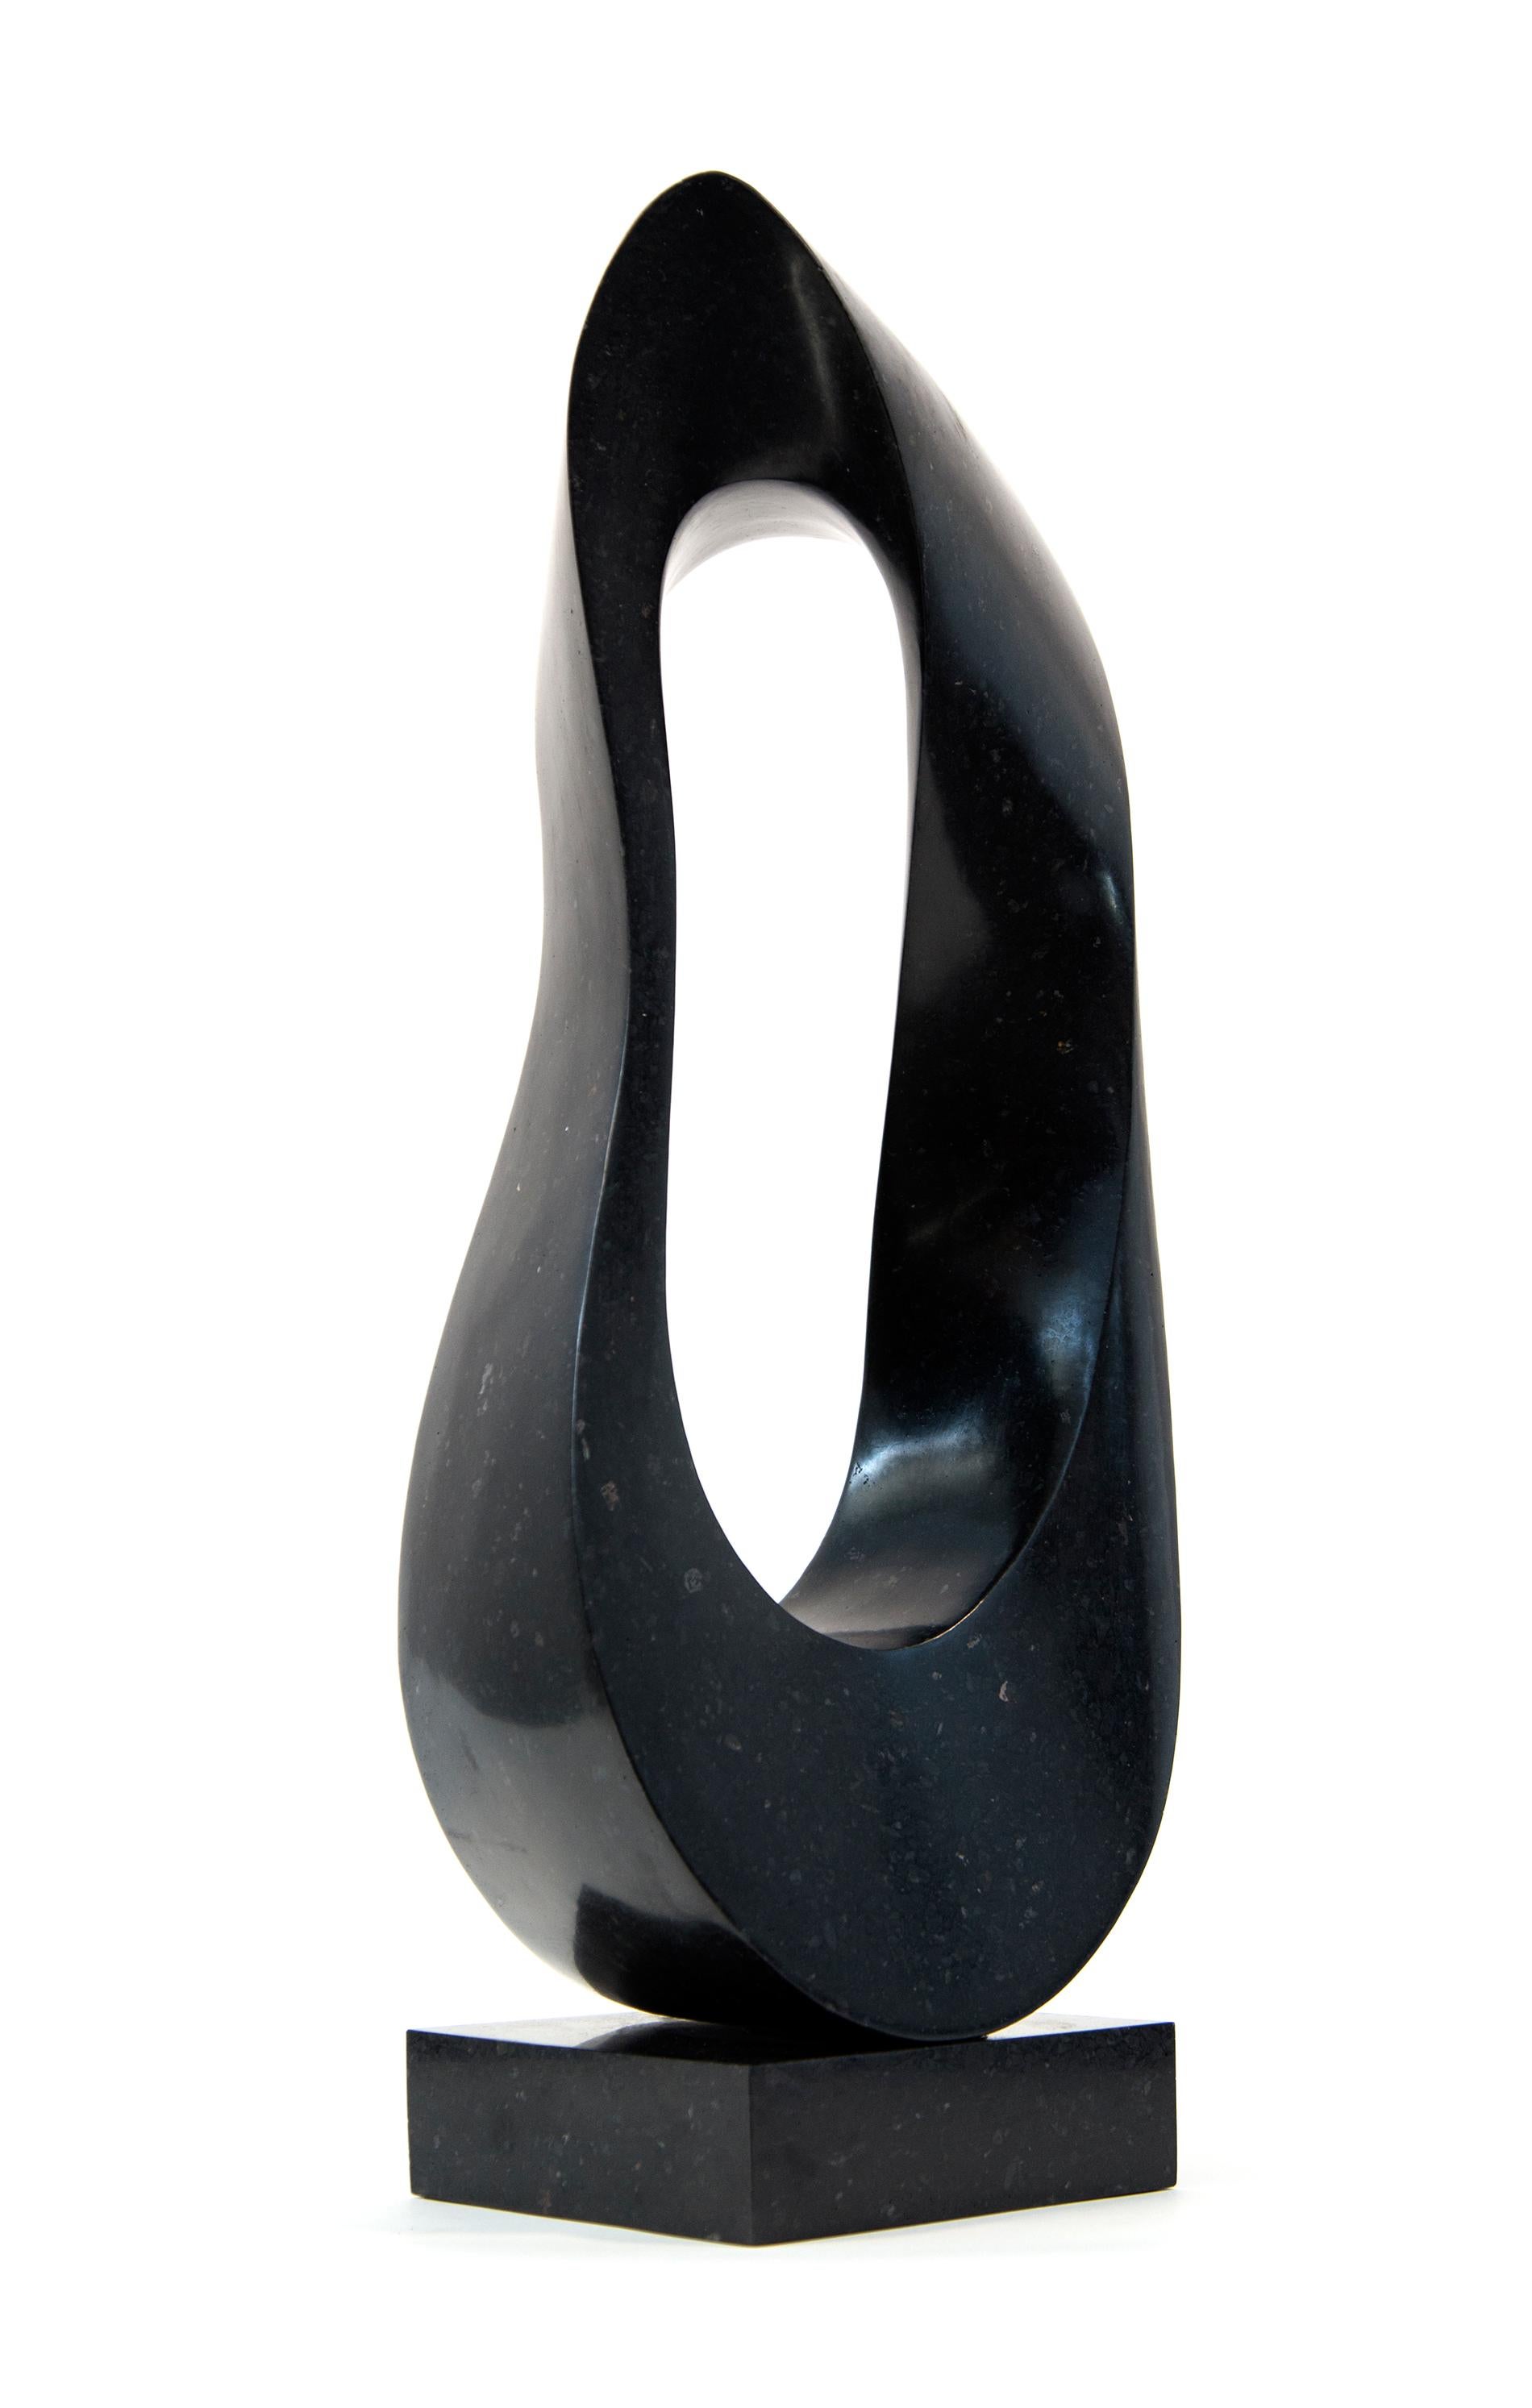 Jeremy Guy Abstract Sculpture - Mobius Minor 1/50 - dark, smooth, polished, abstract, black granite sculpture